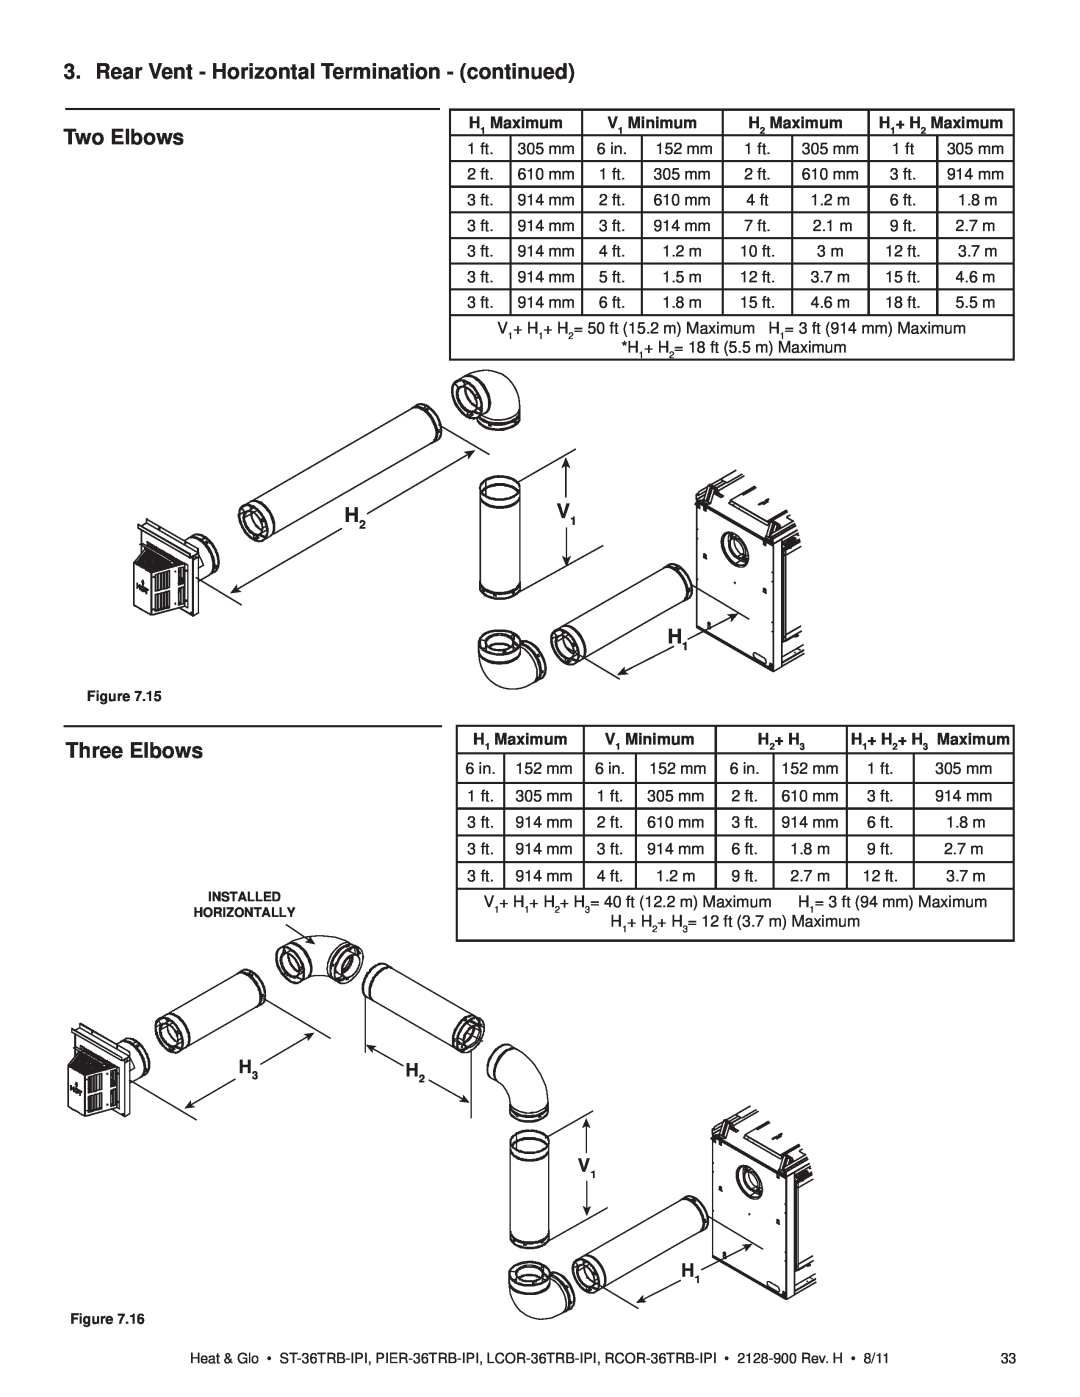 Heat & Glo LifeStyle ST-36TRB-IPI Rear Vent - Horizontal Termination - continued, Two Elbows, Three Elbows, V1 H1 